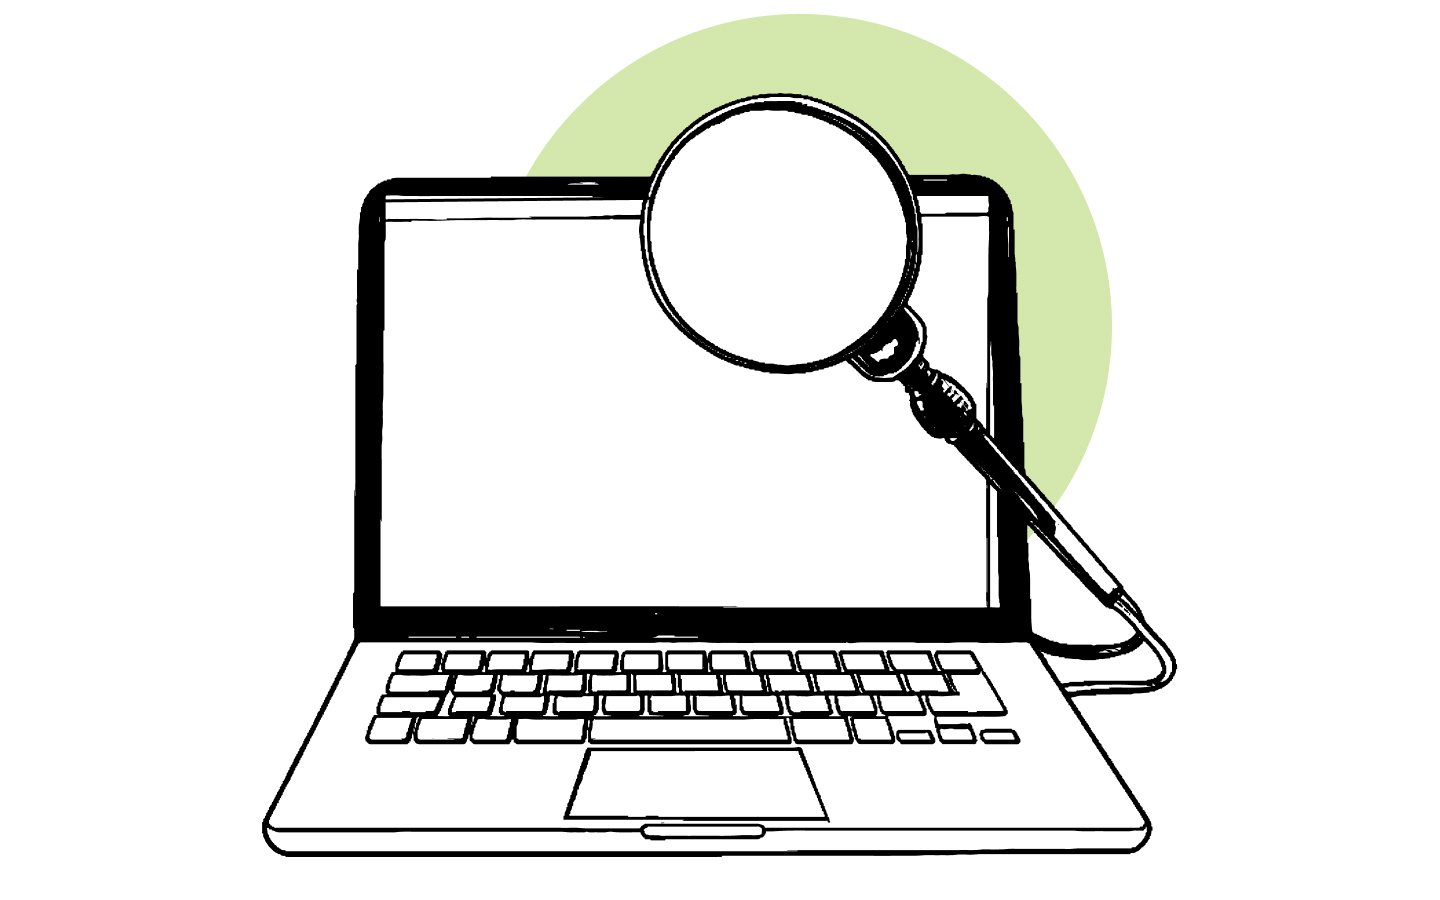 A magnifying glass in front of a laptop screen